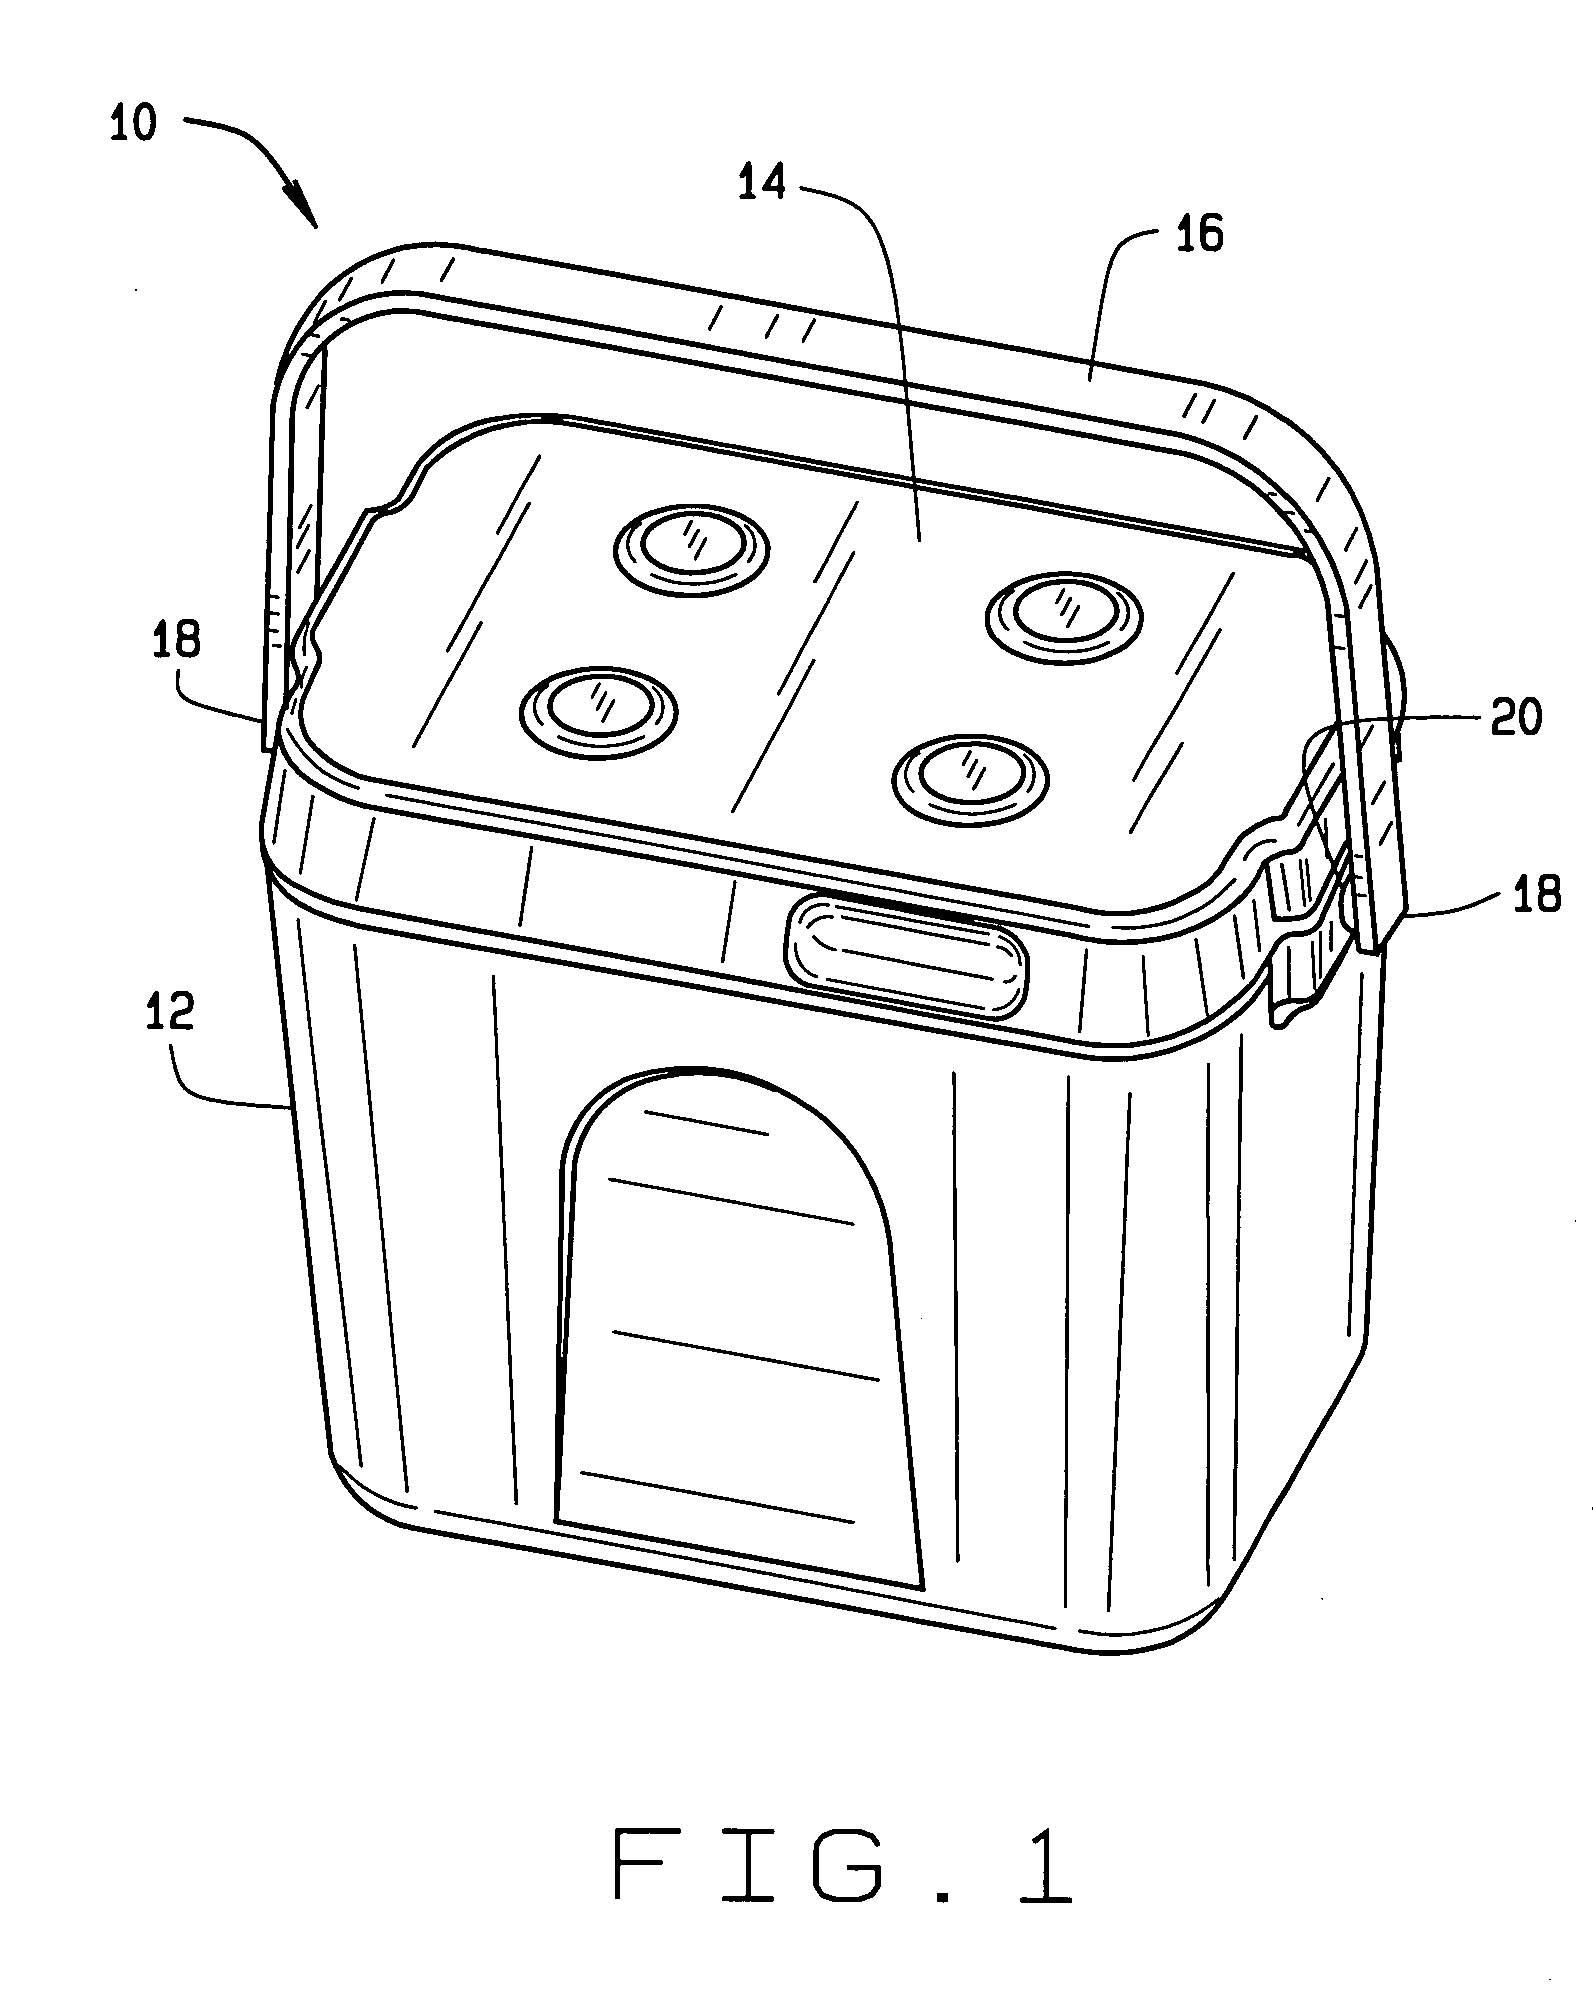 Insulated storage container having a removable liner